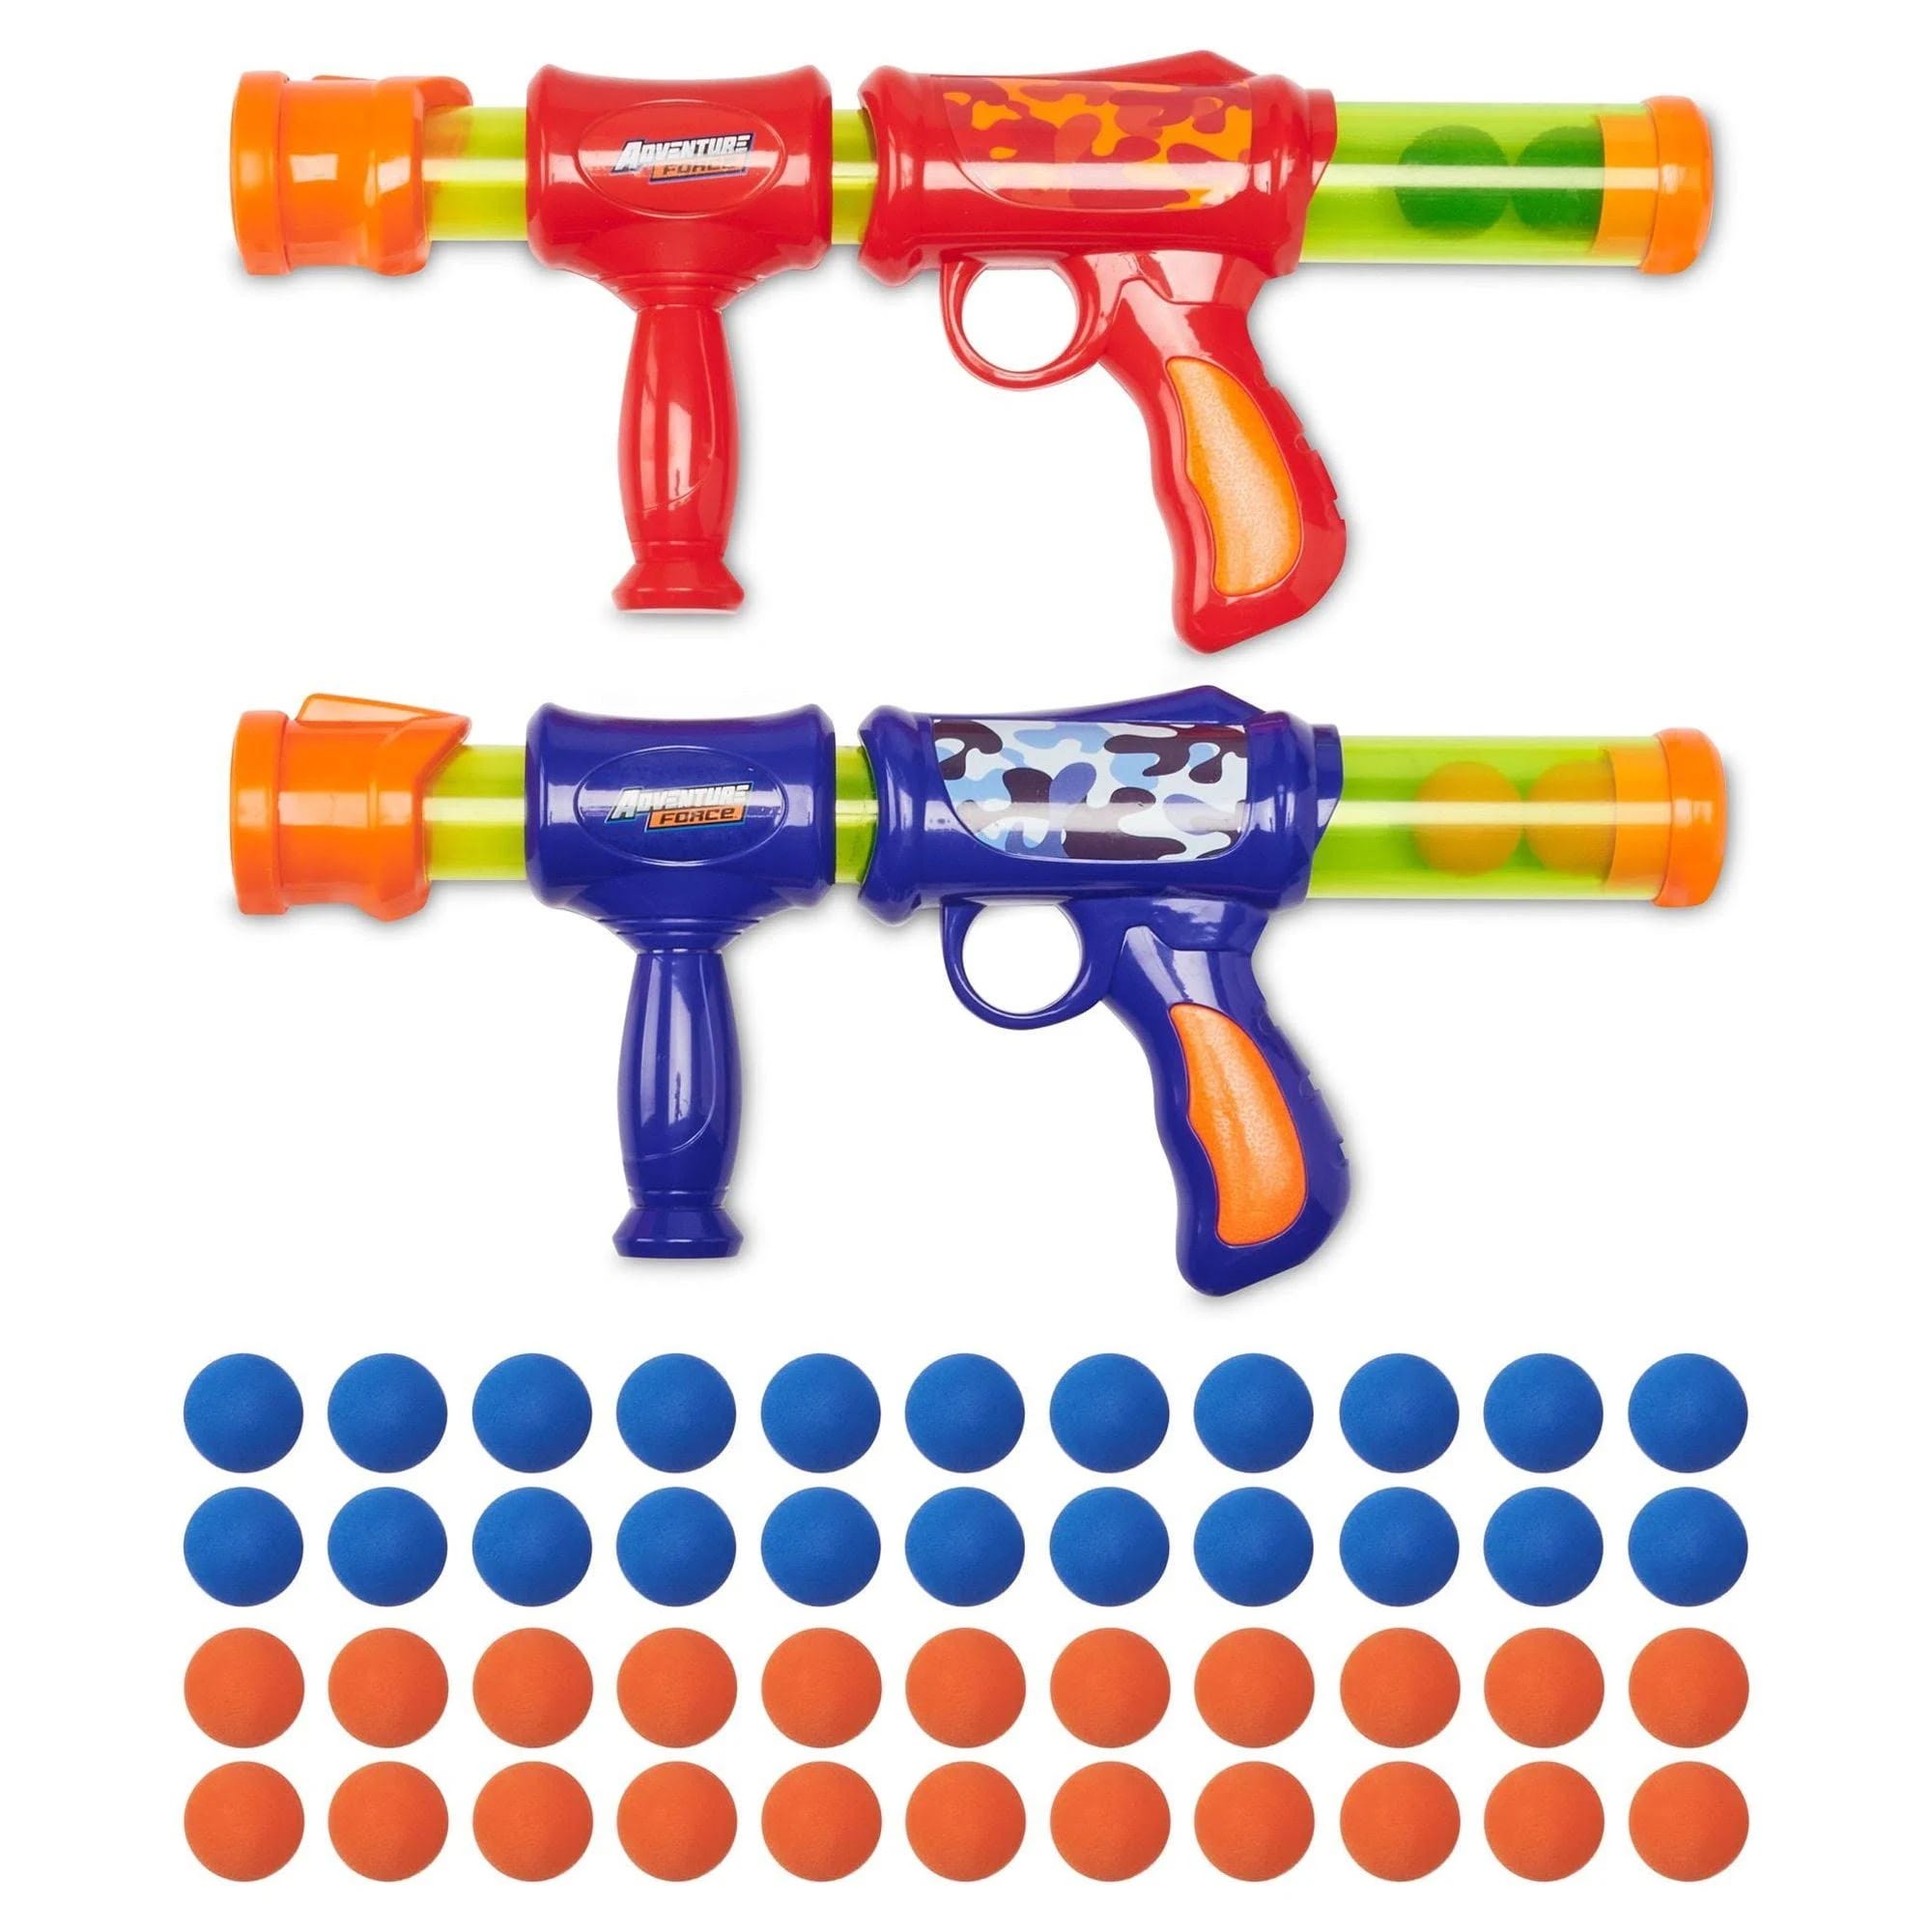 Adventure Force Pop & Bop Pop Blasters - Perfect for Fun-filled Orby Gun Battles for Kids Ages 6+ | Image